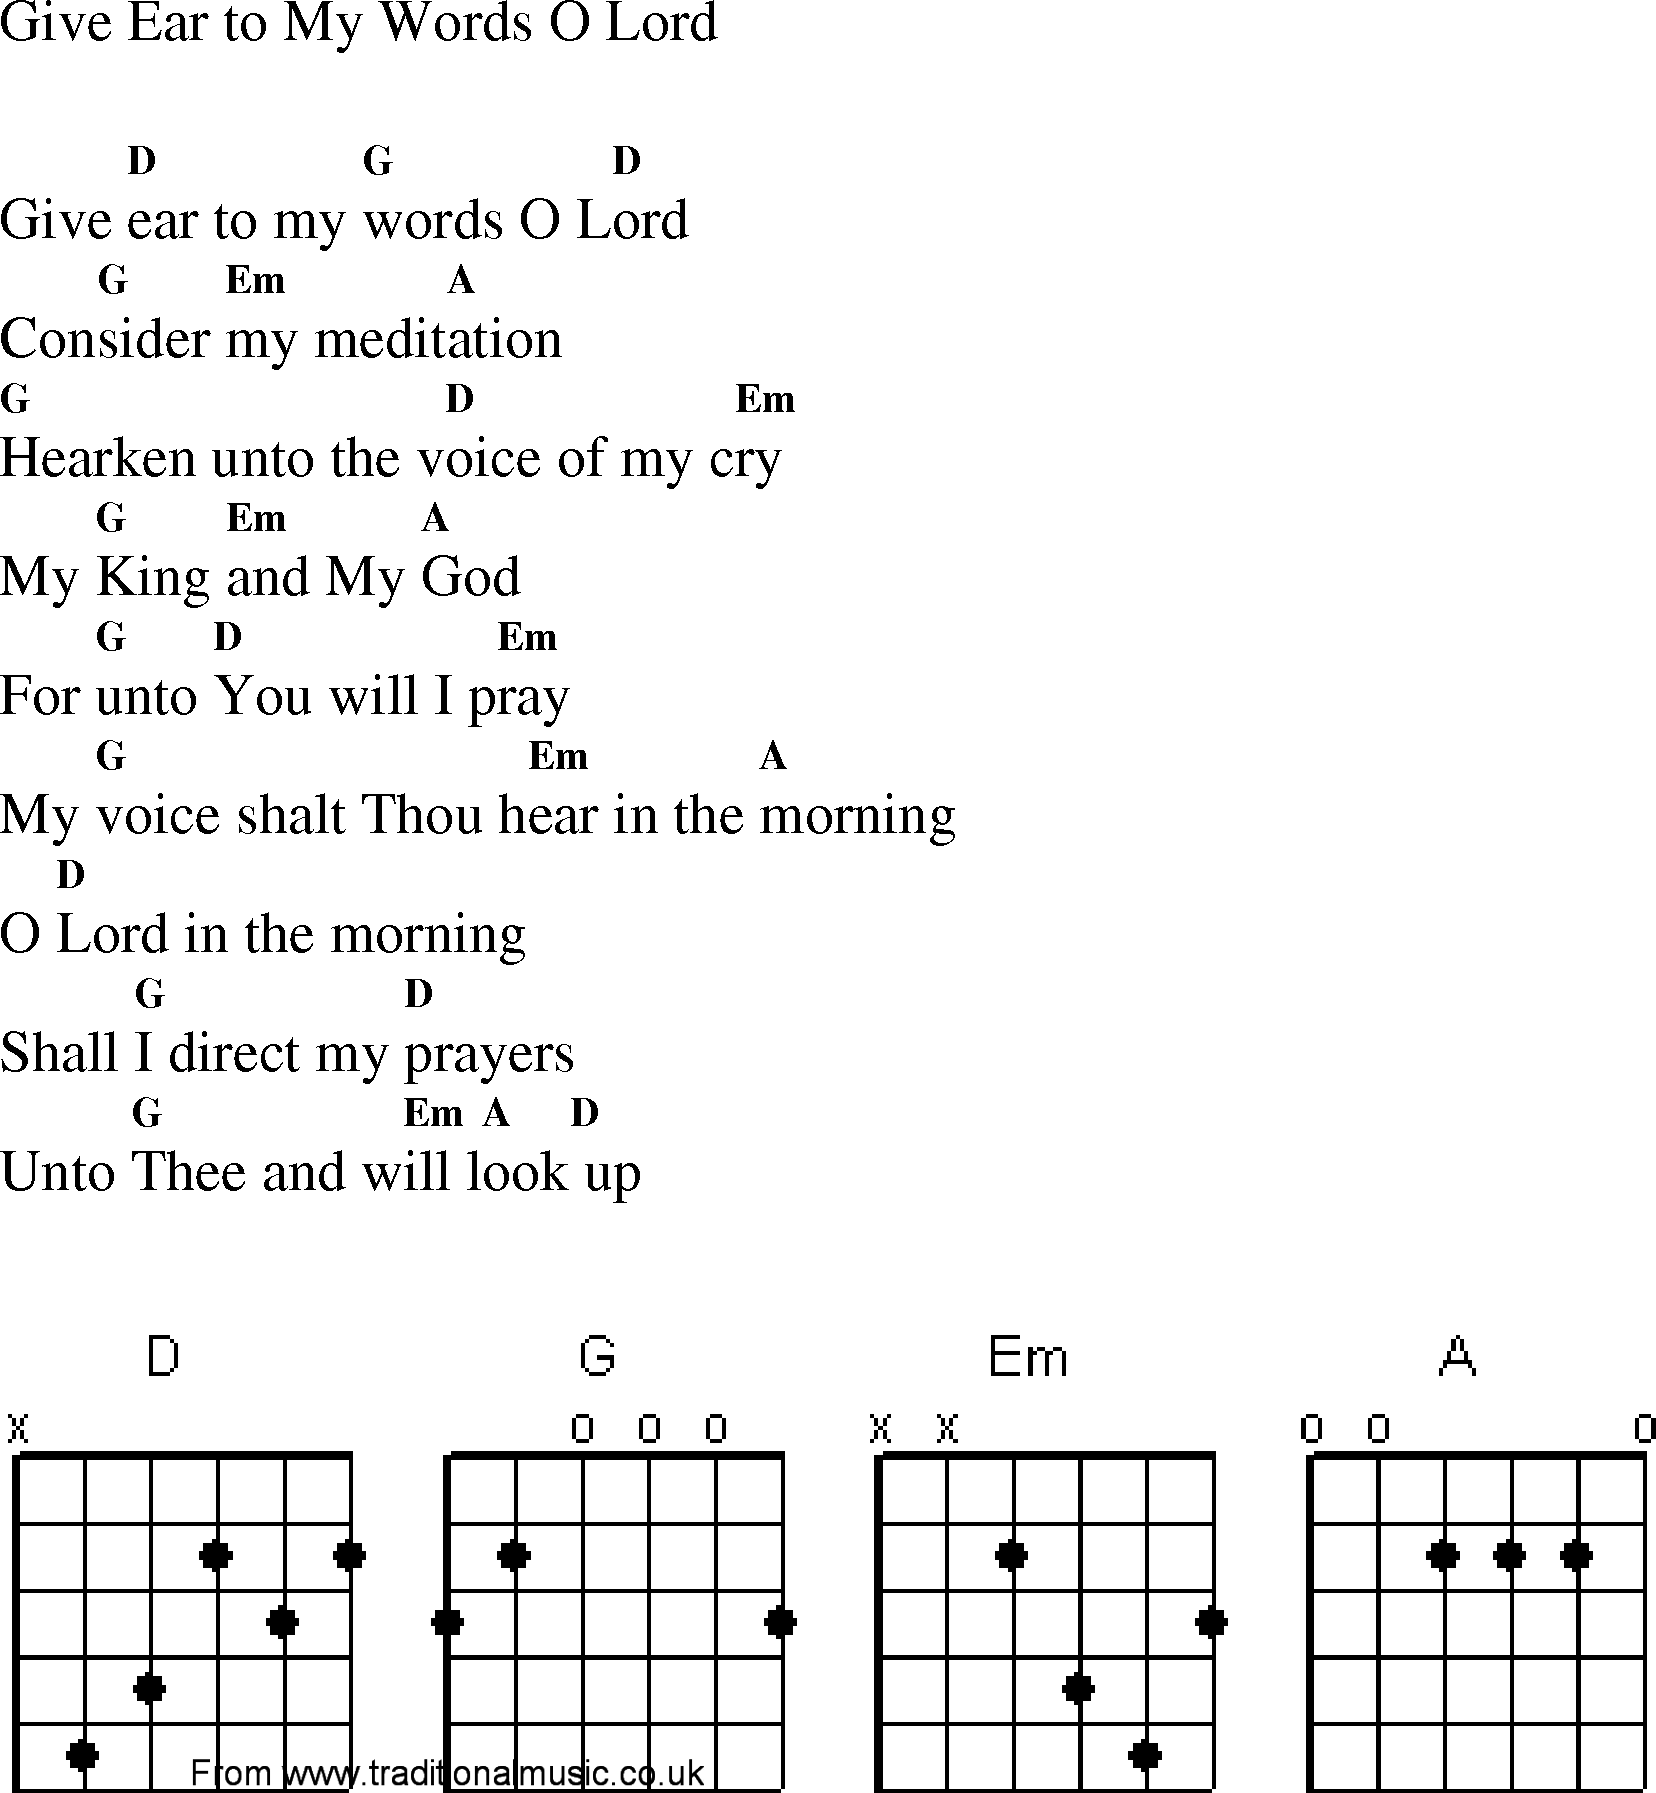 Gospel Song: give_ear_to_my_words_o_lord, lyrics and chords.